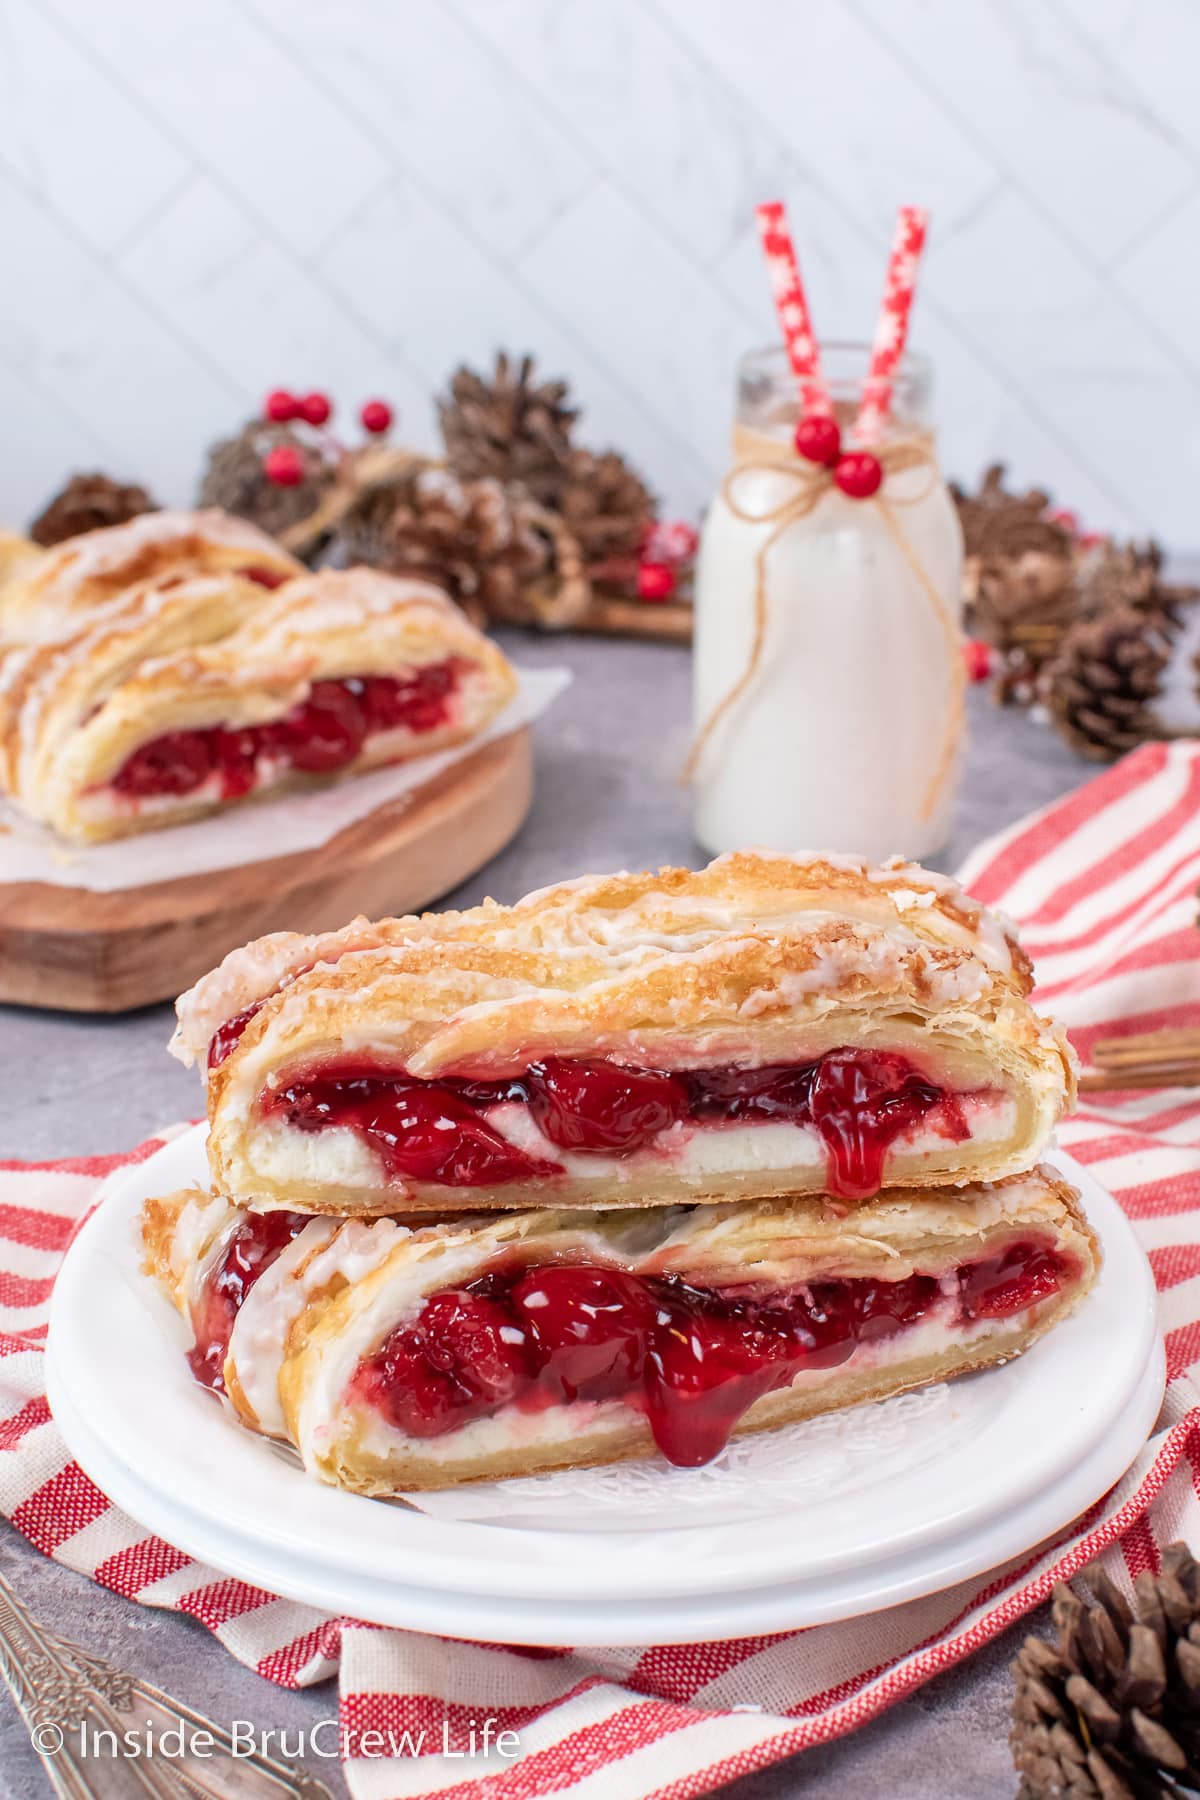 Slices of cherry danish stacked on a white plate.